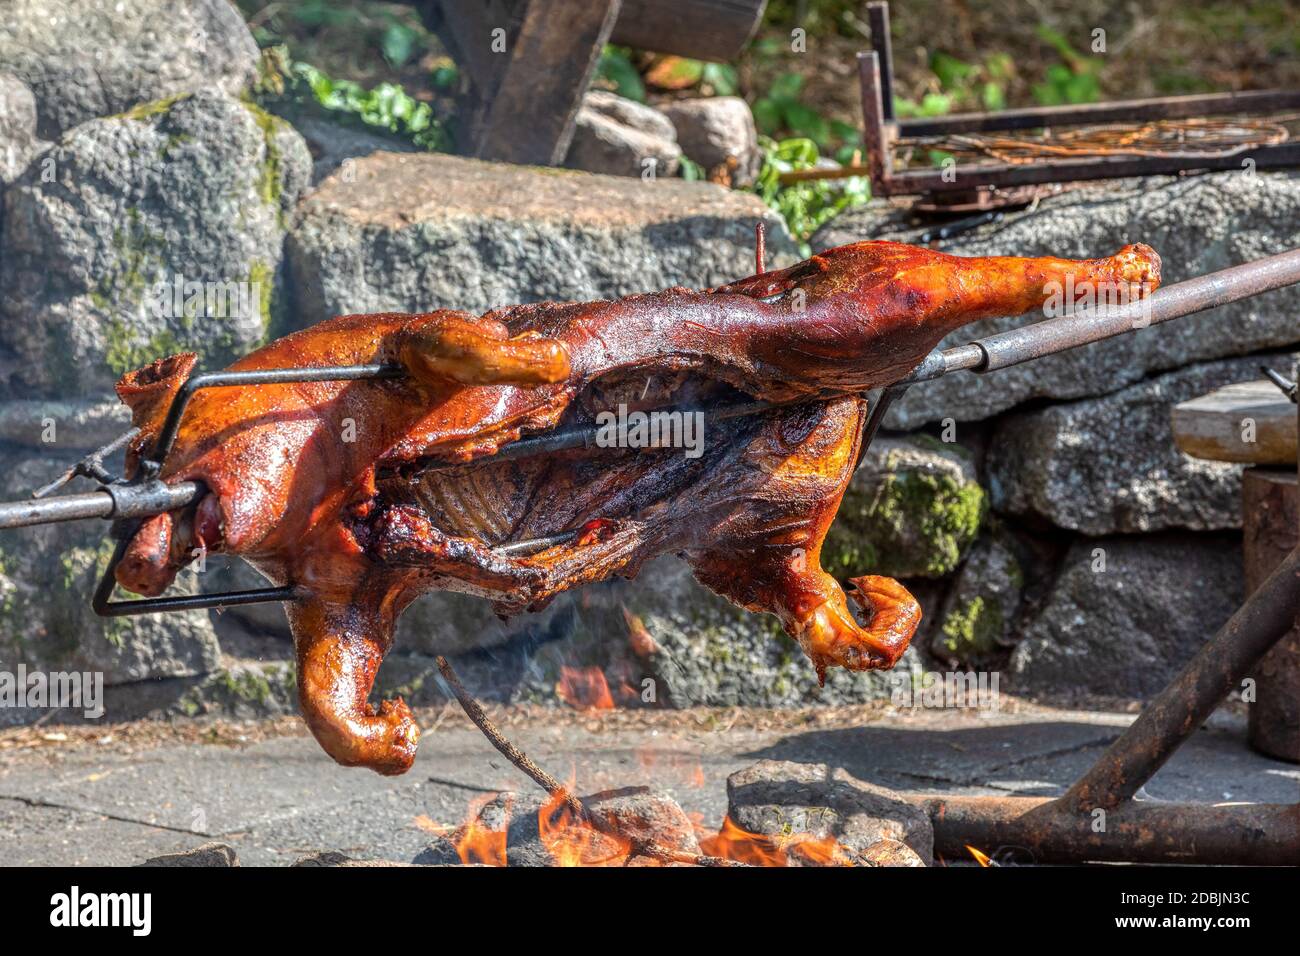 Suckling pig roasted on a spit. Piglet on the spit, open fire grill in outdoor Stock Photo